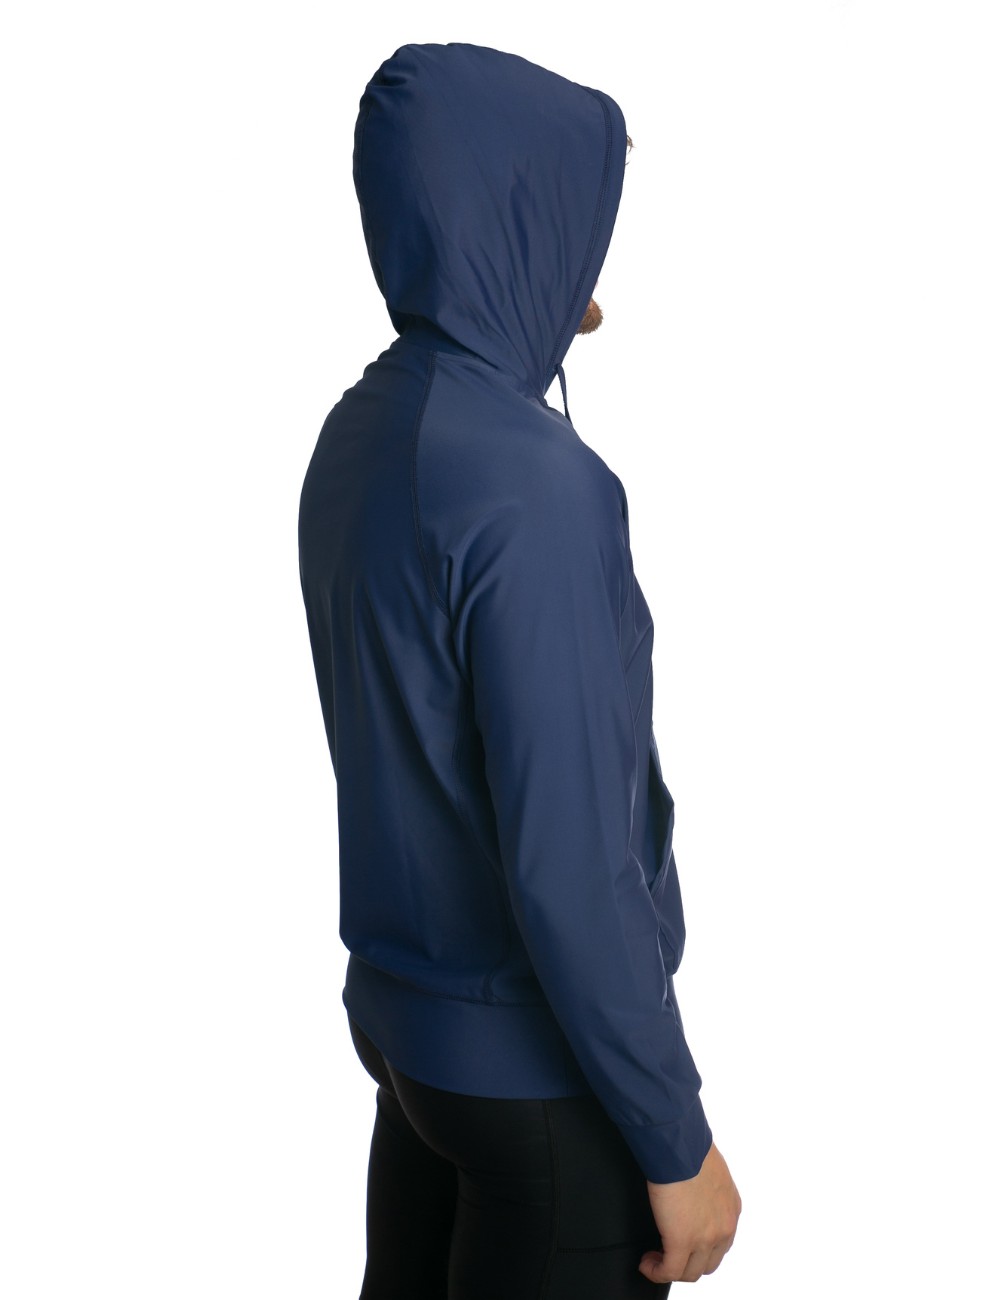 Men's hooded jacket with sun protection 